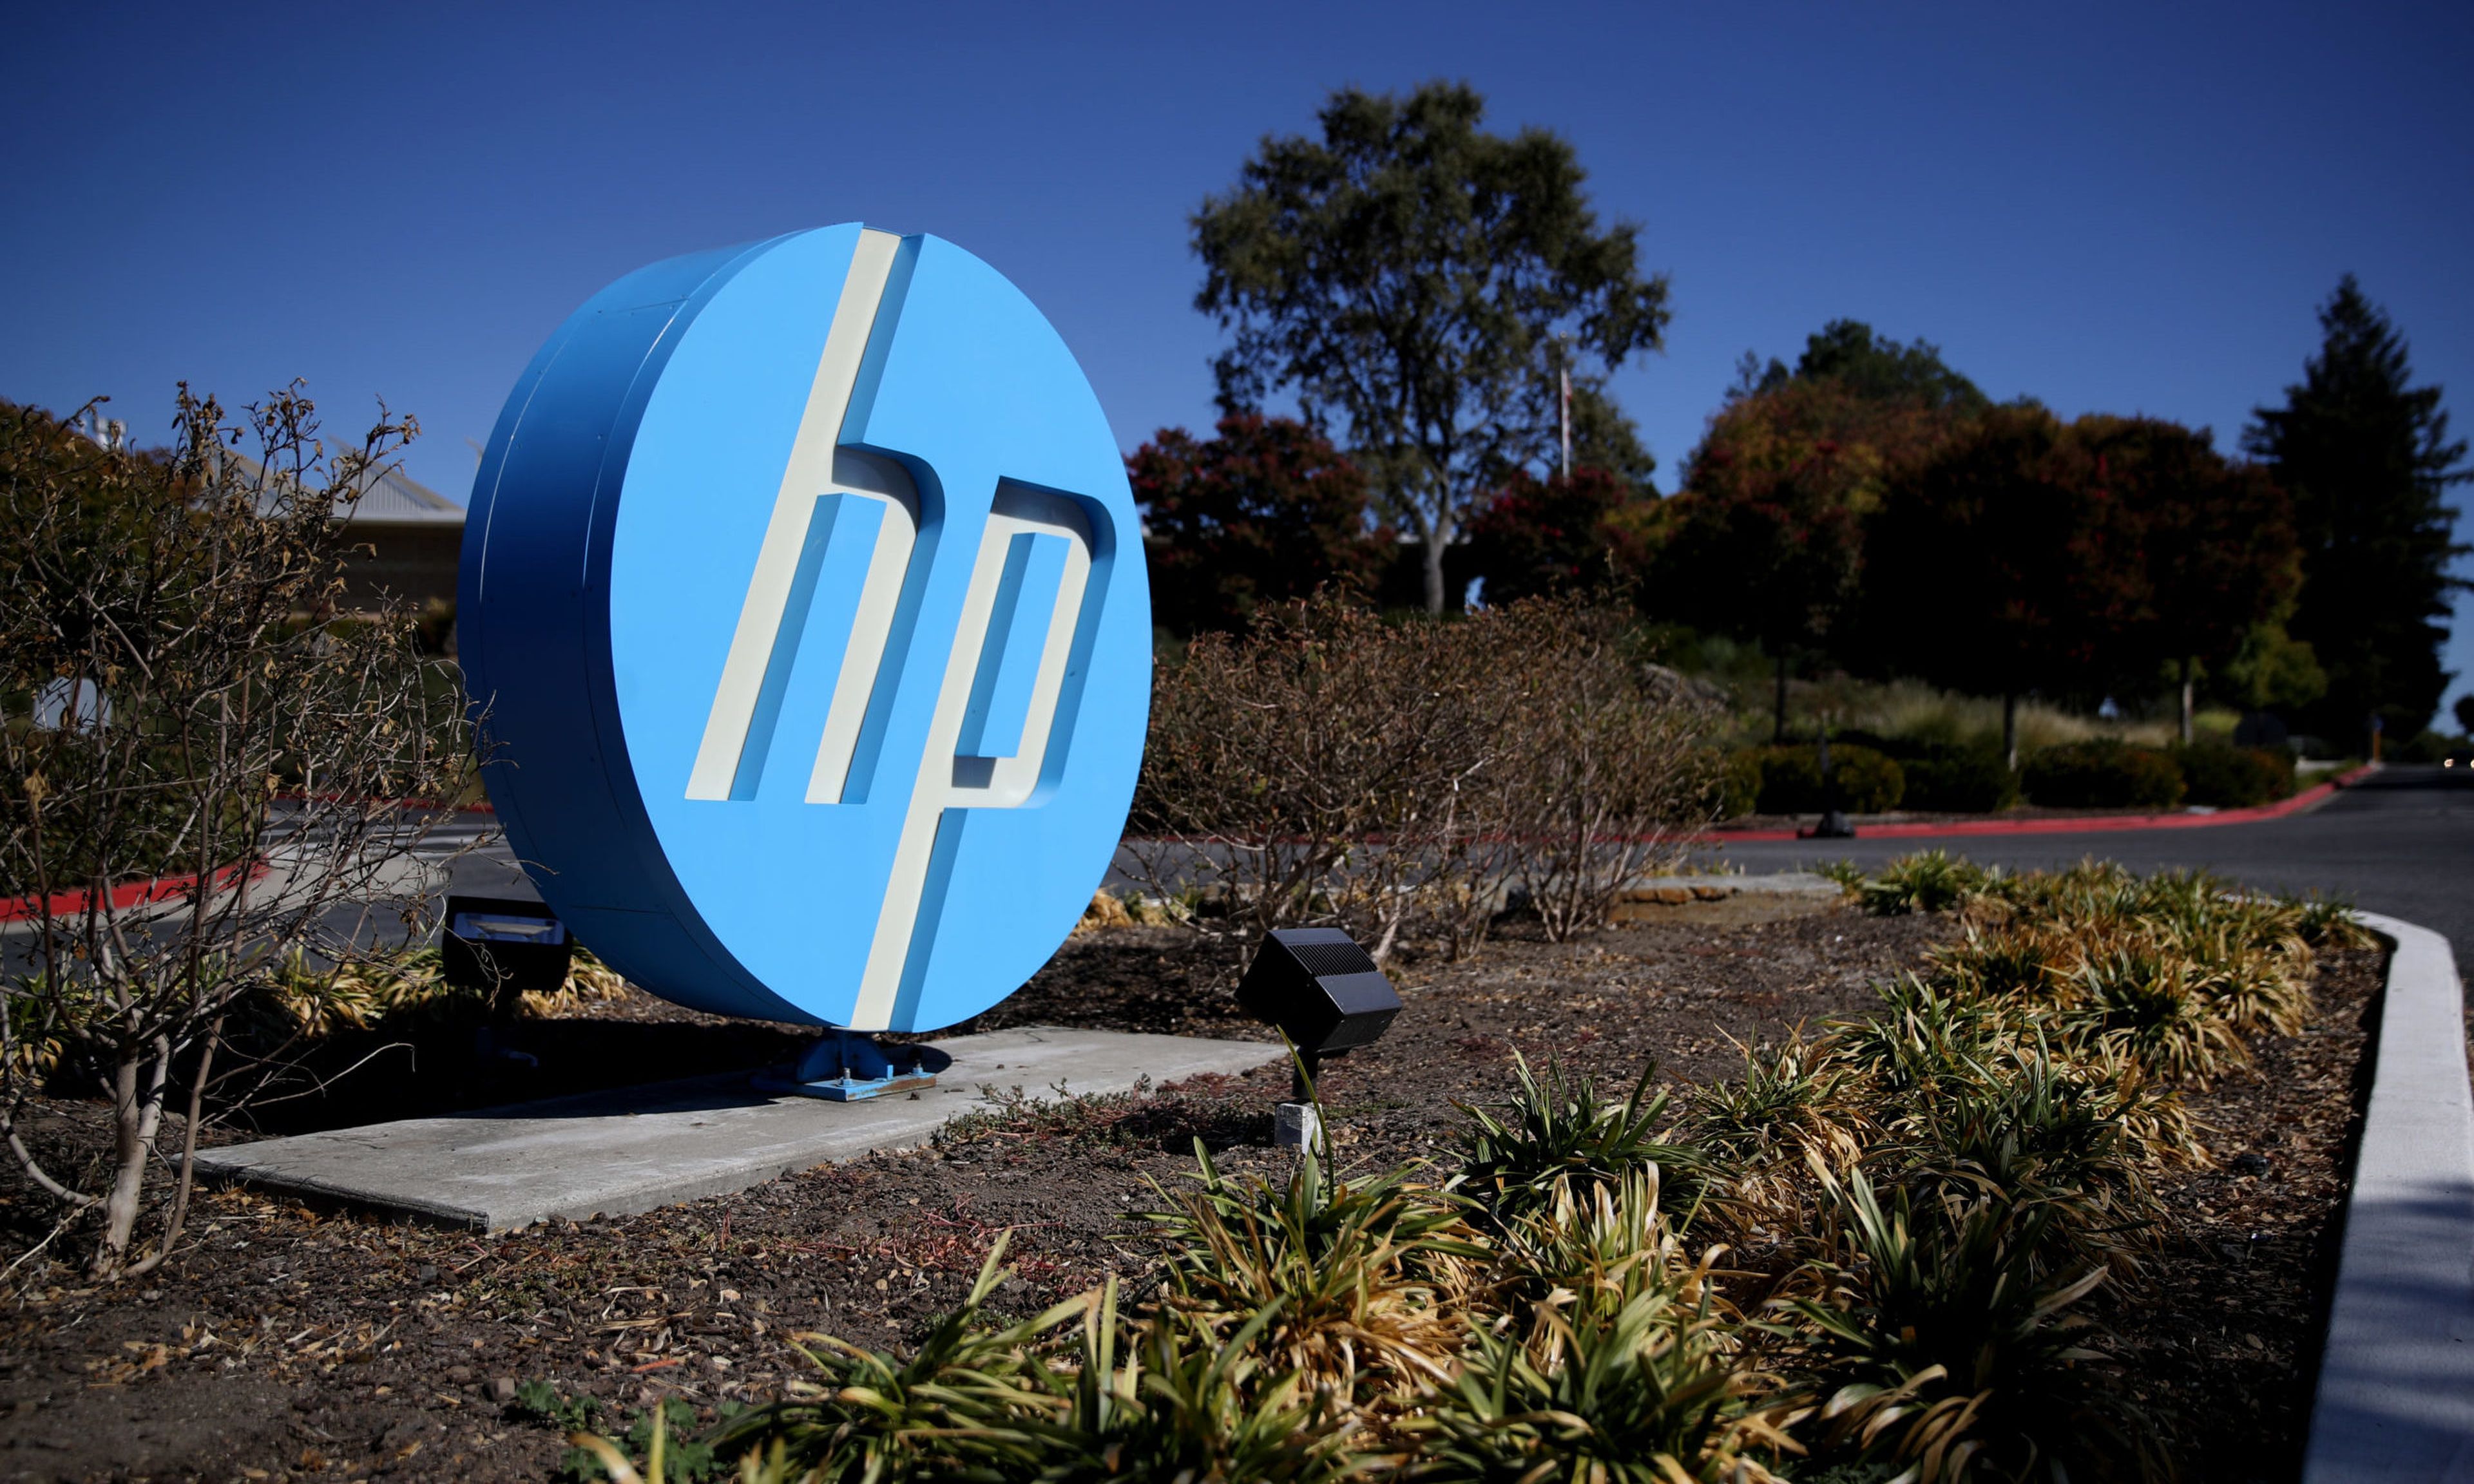 PALO ALTO, CALIFORNIA &#8211; OCTOBER 04: The Hewlett Packard (HP) logo is displayed in front of the office complex on October 04, 2019 in Palo Alto, California. HP announced plans to cut 7,000 to 9,000 jobs in an effort to save about $1 billion by the end of fiscal 2022. (Photo by Justin Sullivan/Getty Images)